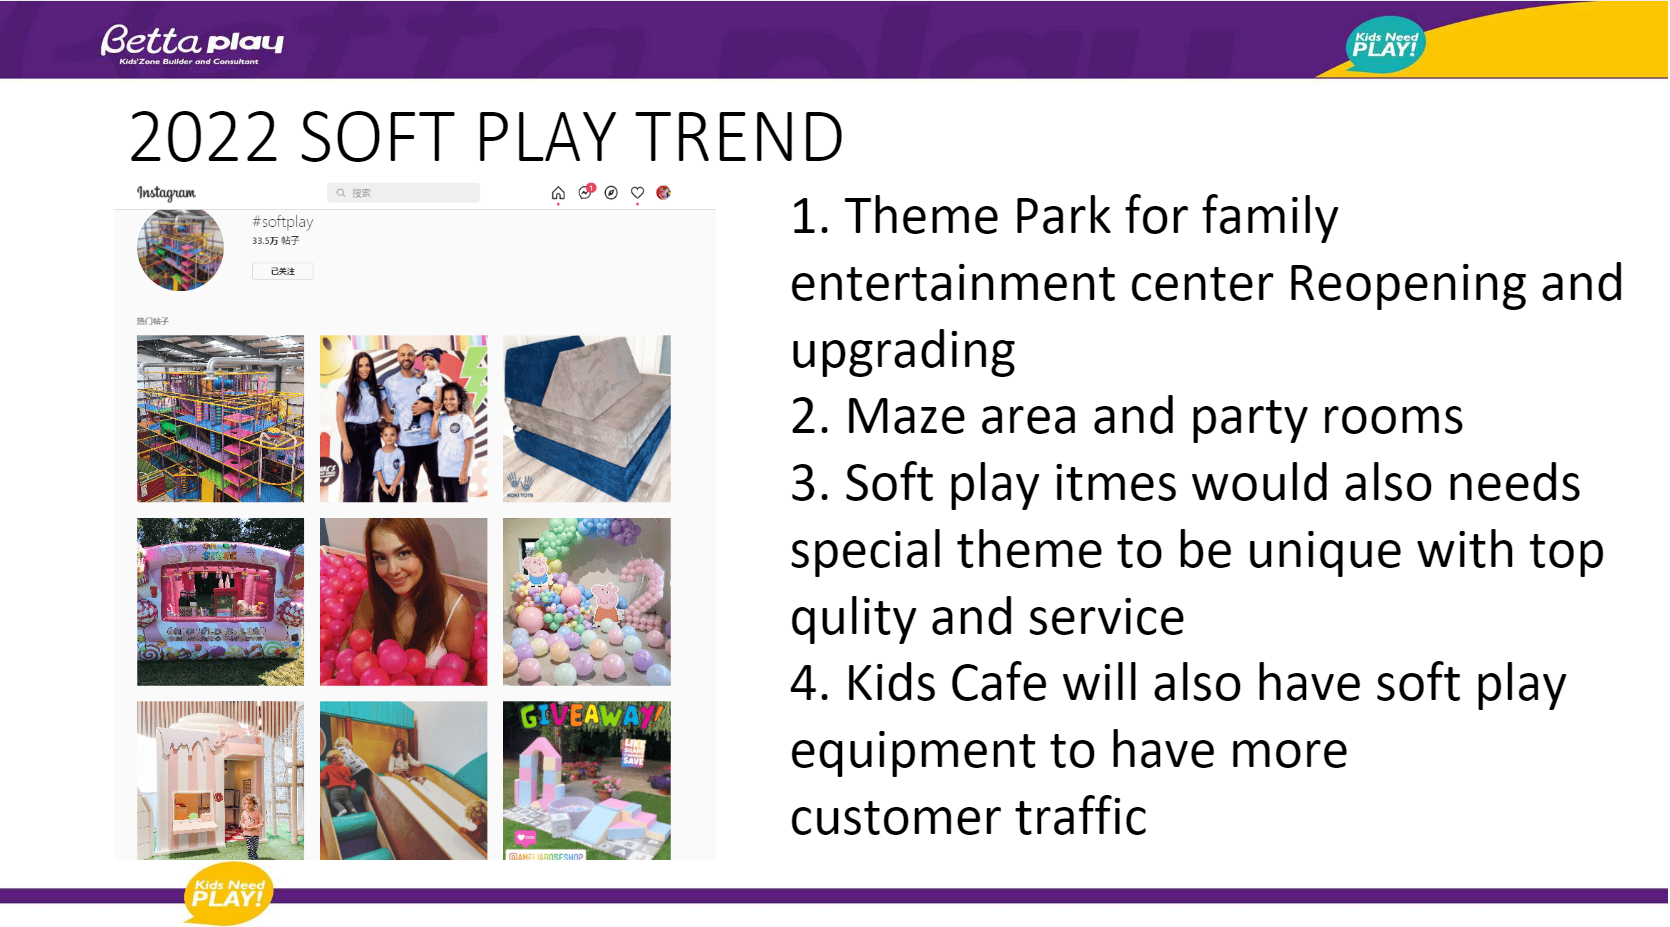 2022 soft play trend